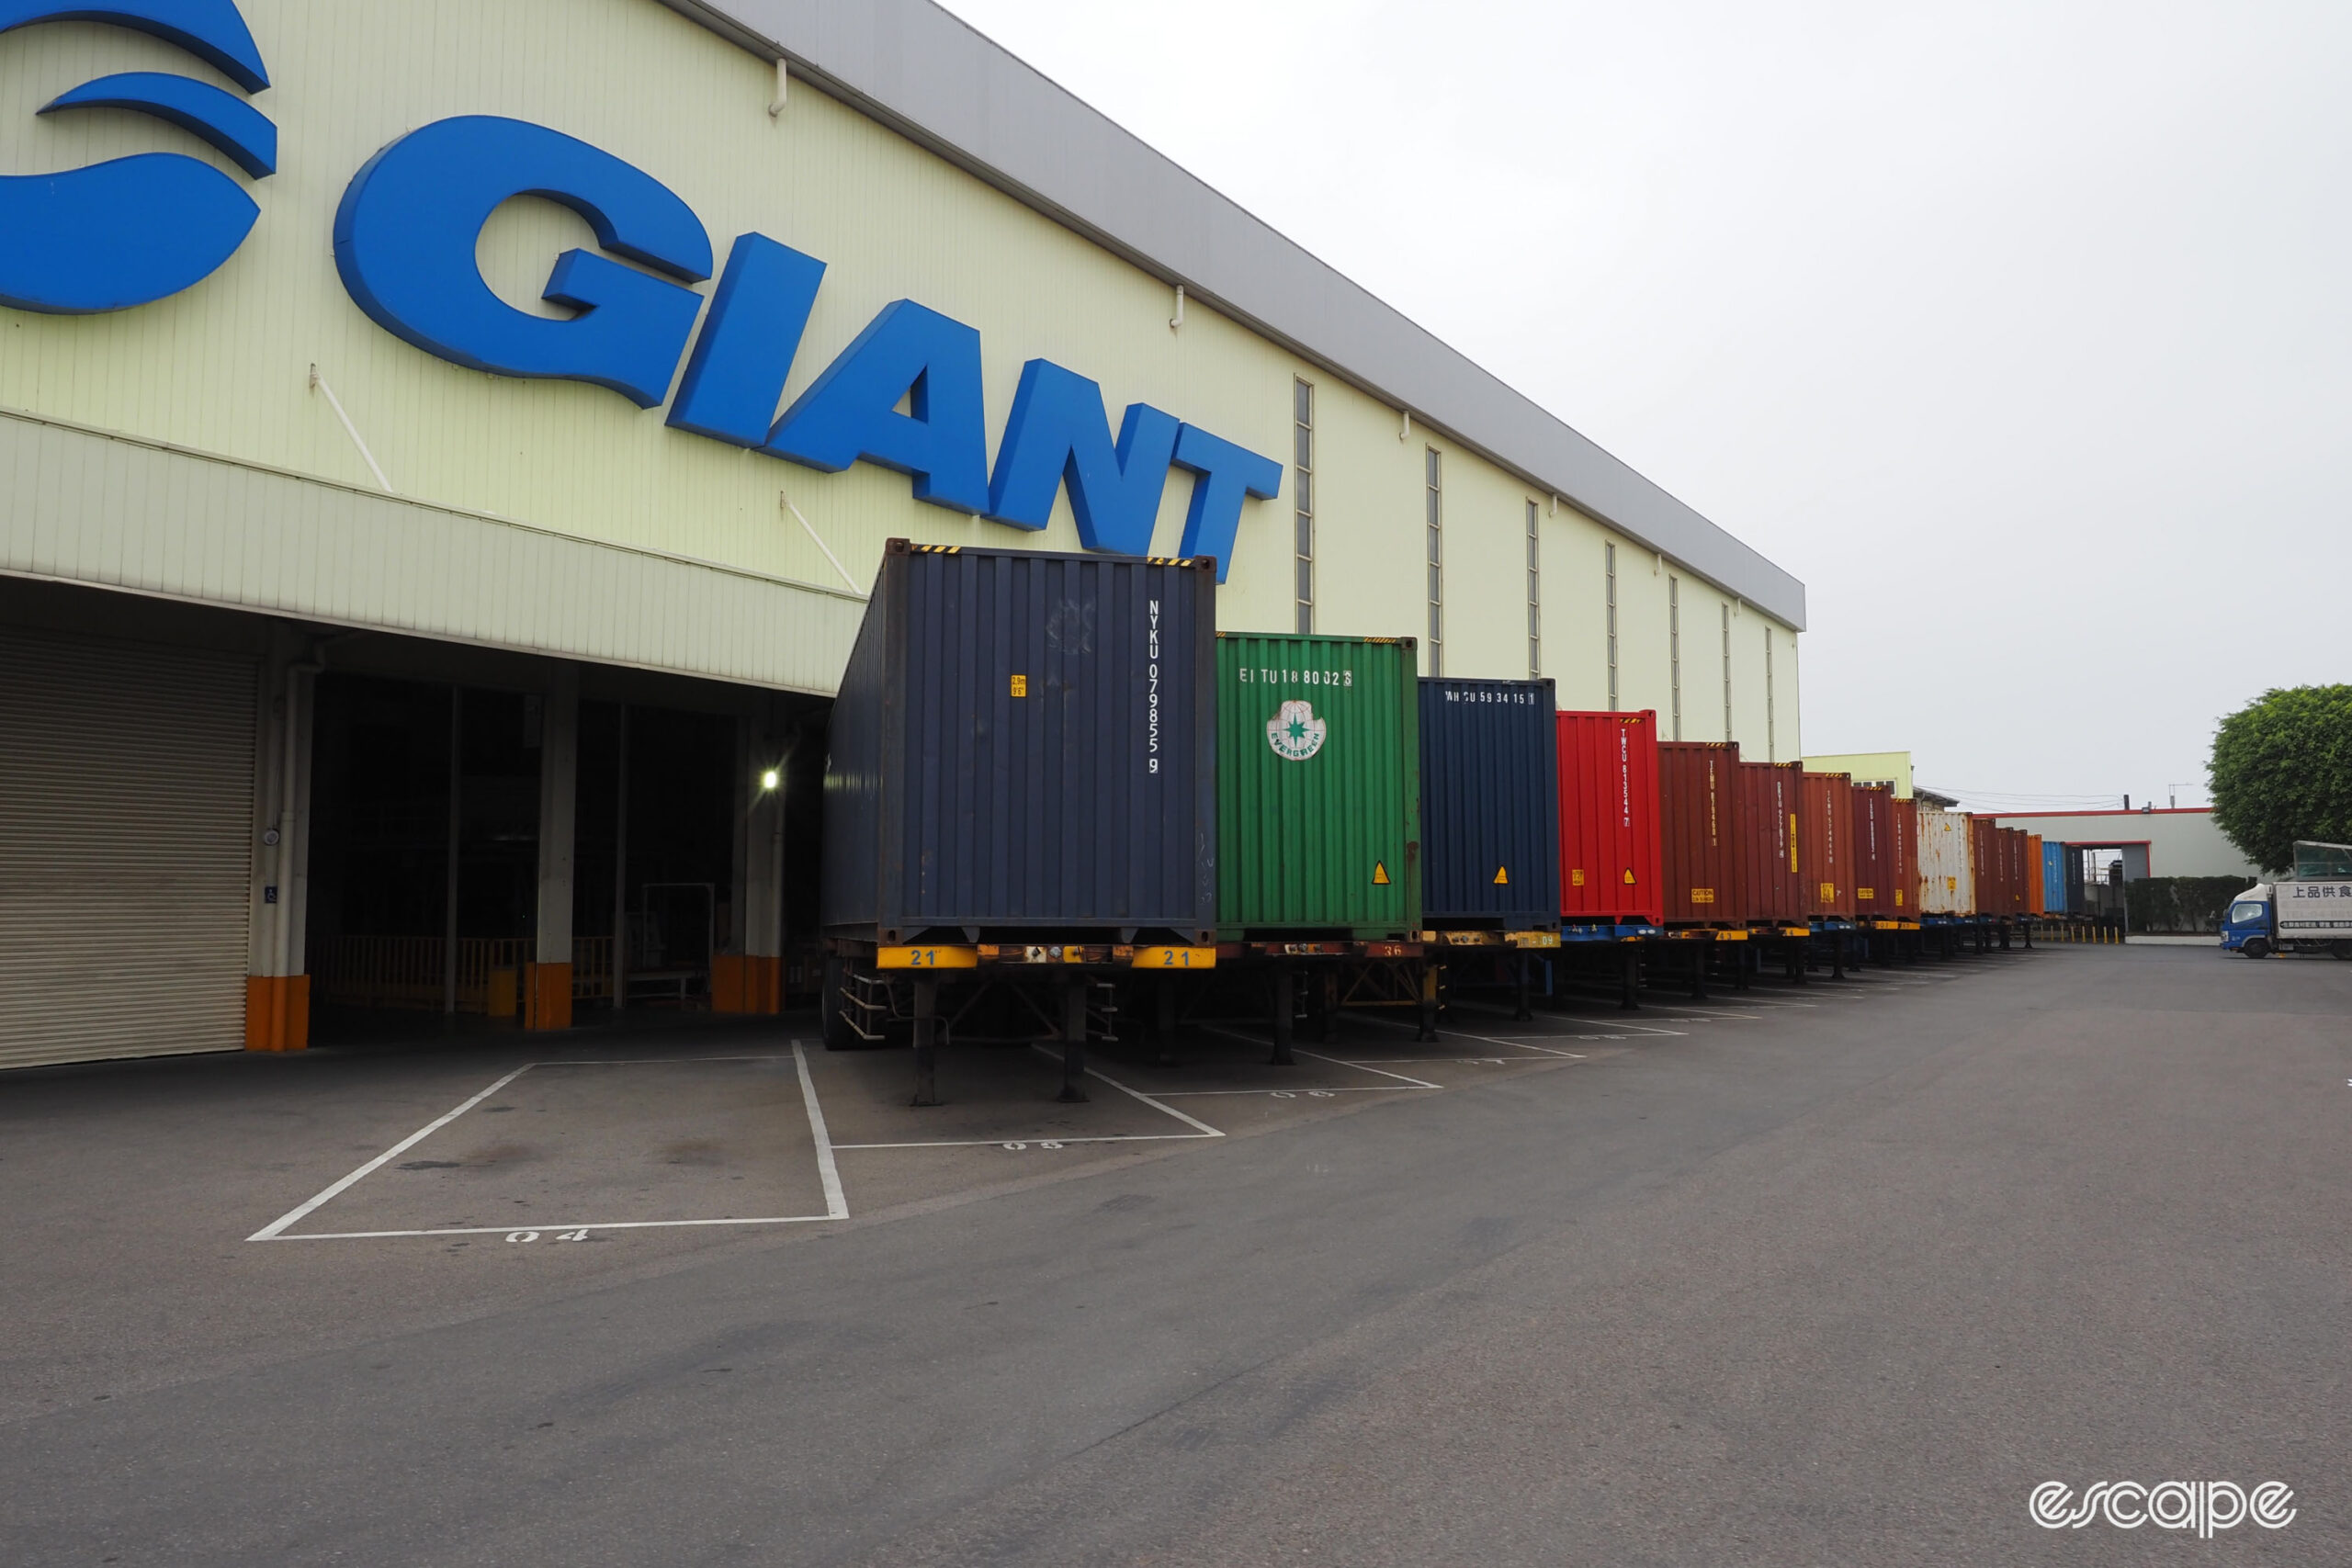 Giant carbon factory tour shipping containers